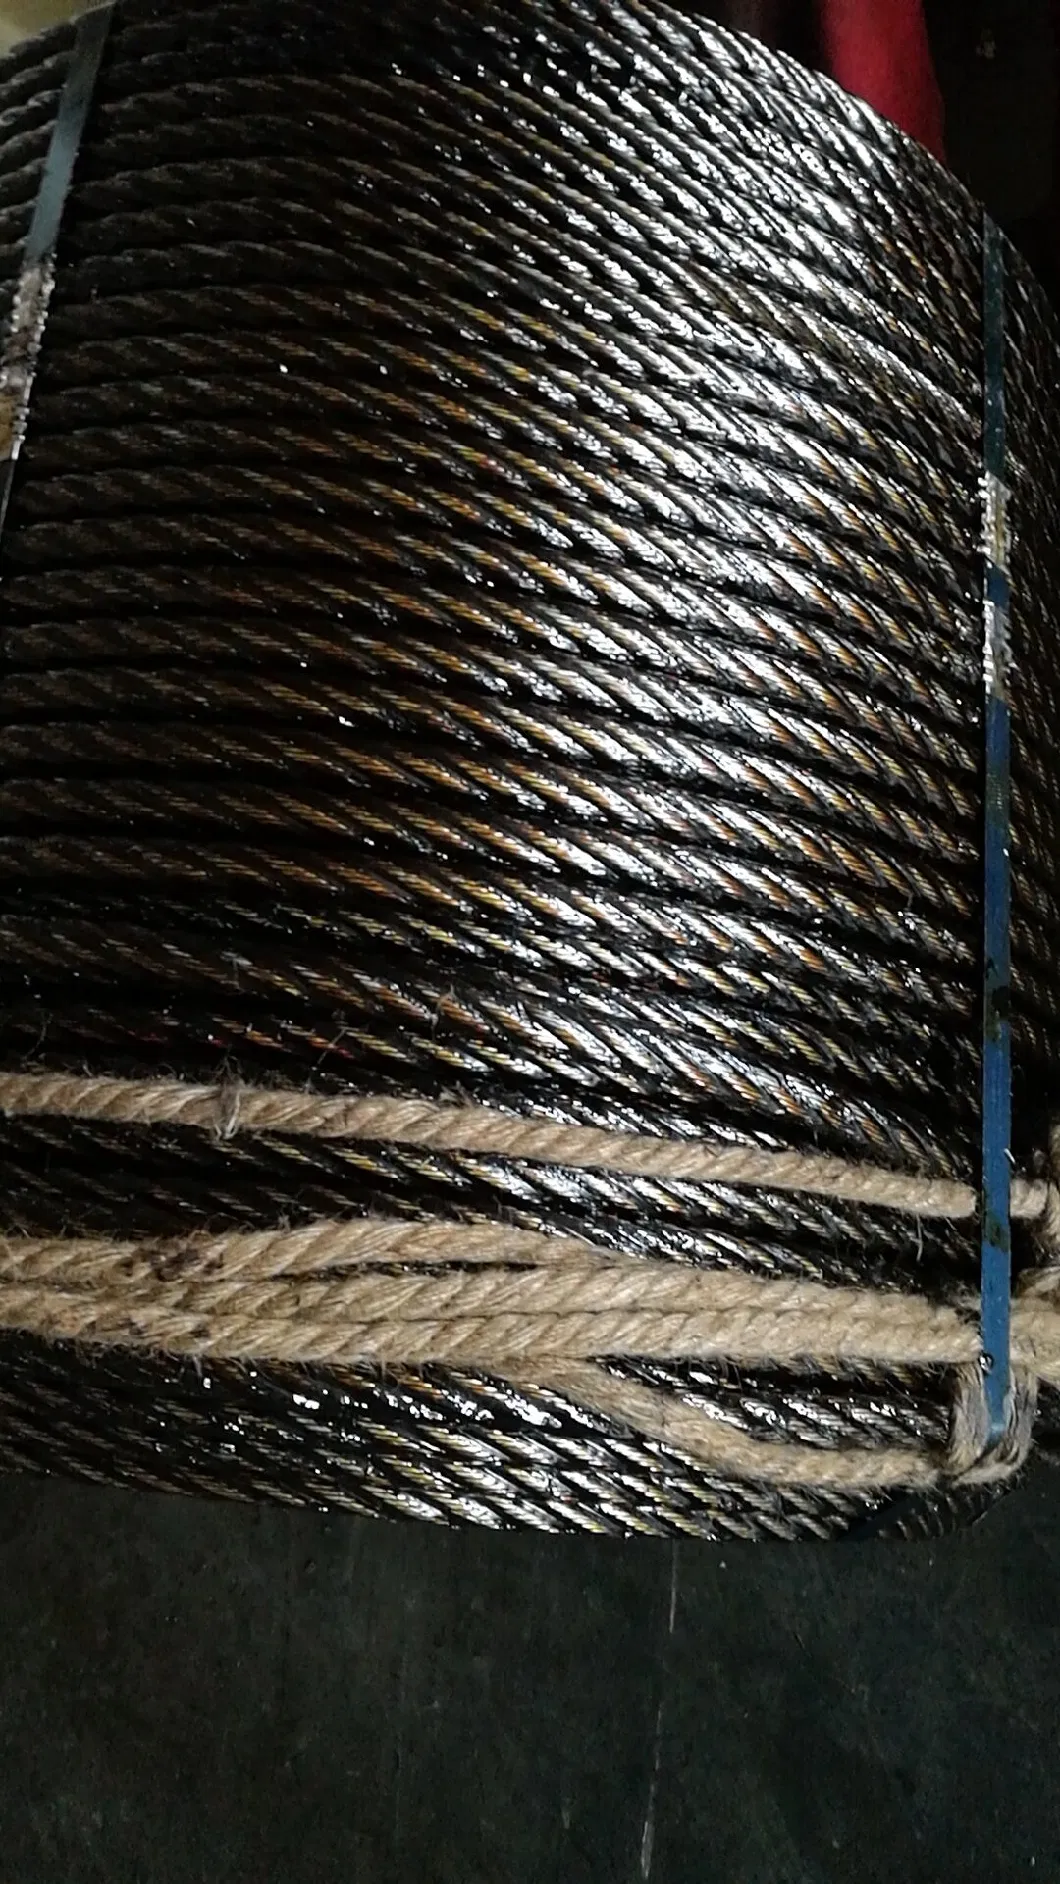 Compacted Steel Cable, Wire Rope 6xk36ws, DIN3064, Cable De Acero